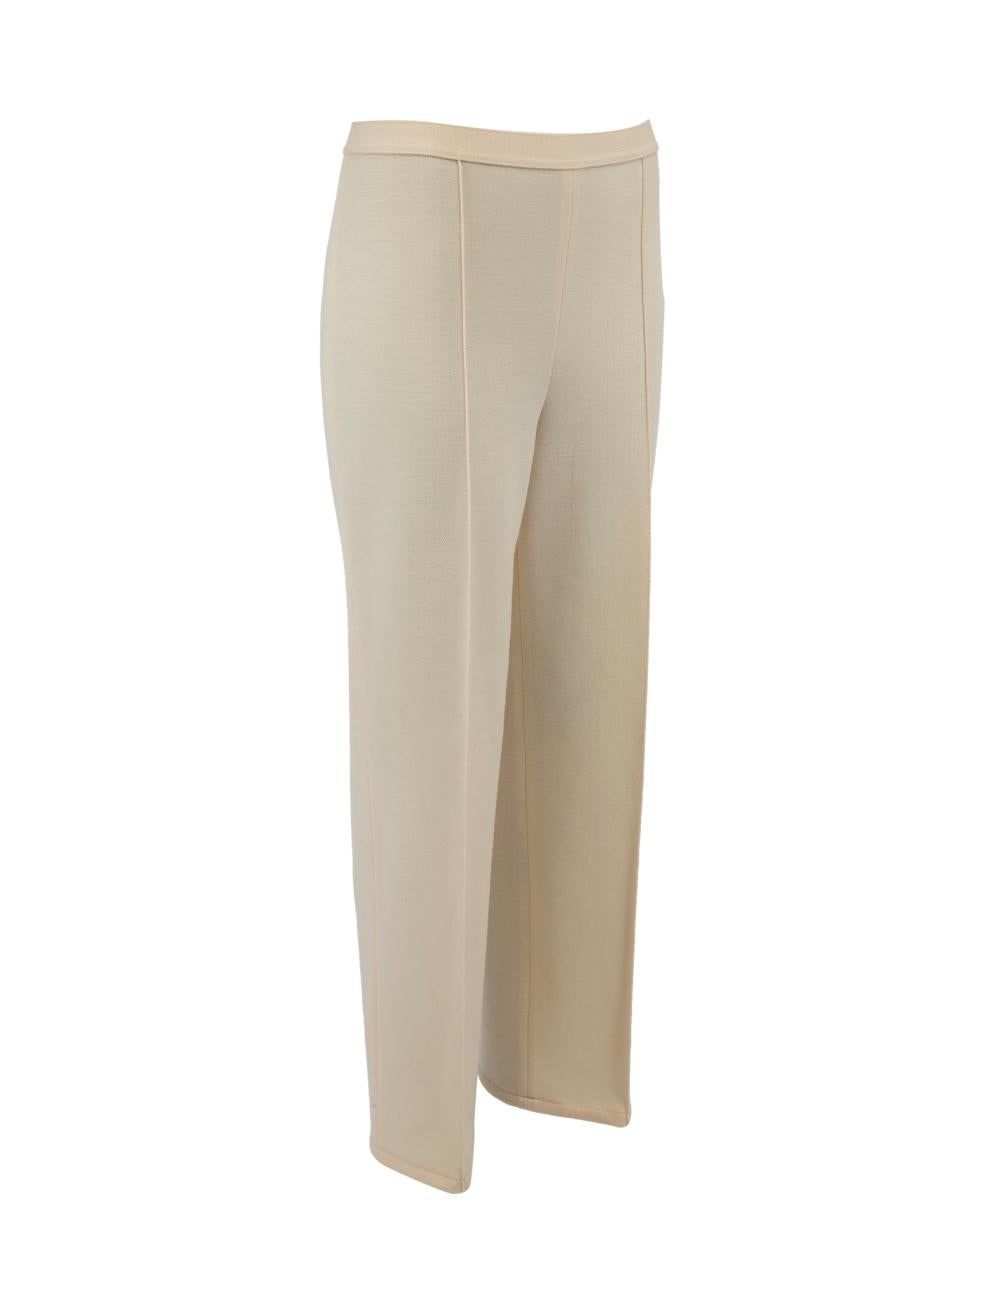 CONDITION is Very good. Minimal wear to trousers is evident. Visible stains on the leg of trousers on this used Luisa Spagnoli designer resale item. Details Cream Wool Culottes Straight leg Cropped length High rise Made in Italy Composition 100%